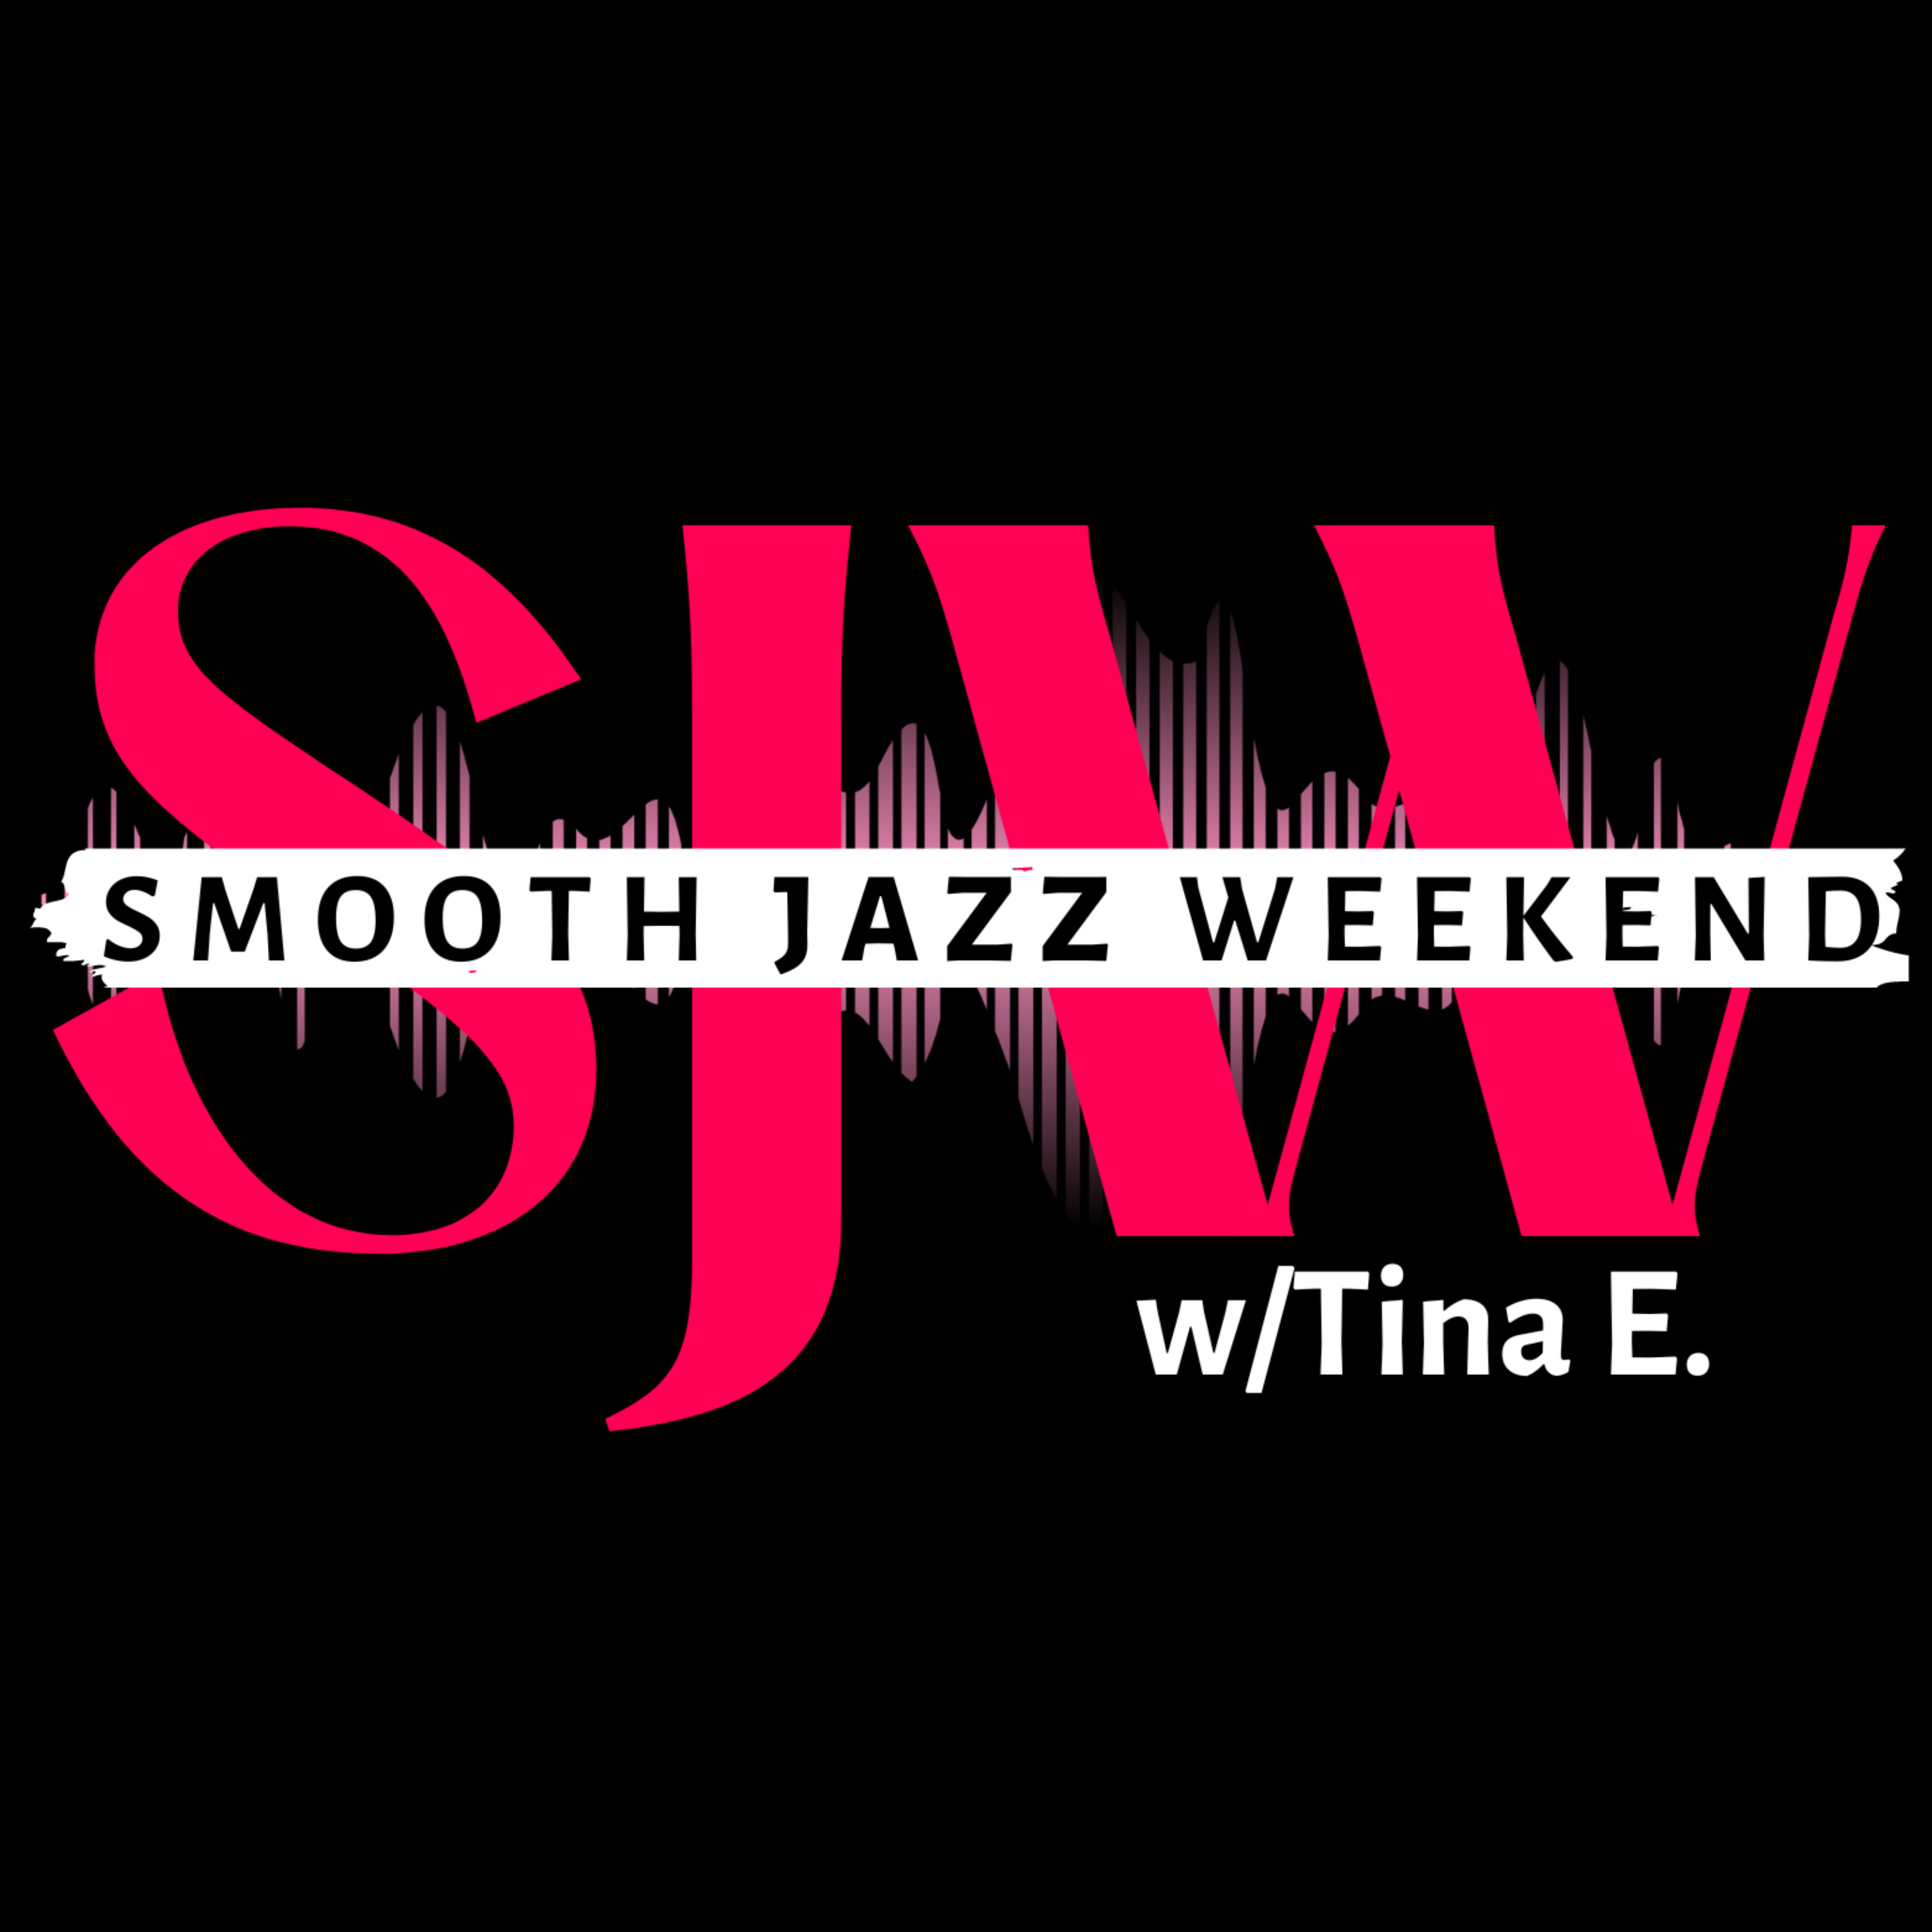 (Ready For You) Smooth Jazz Weekend w/Tina E.